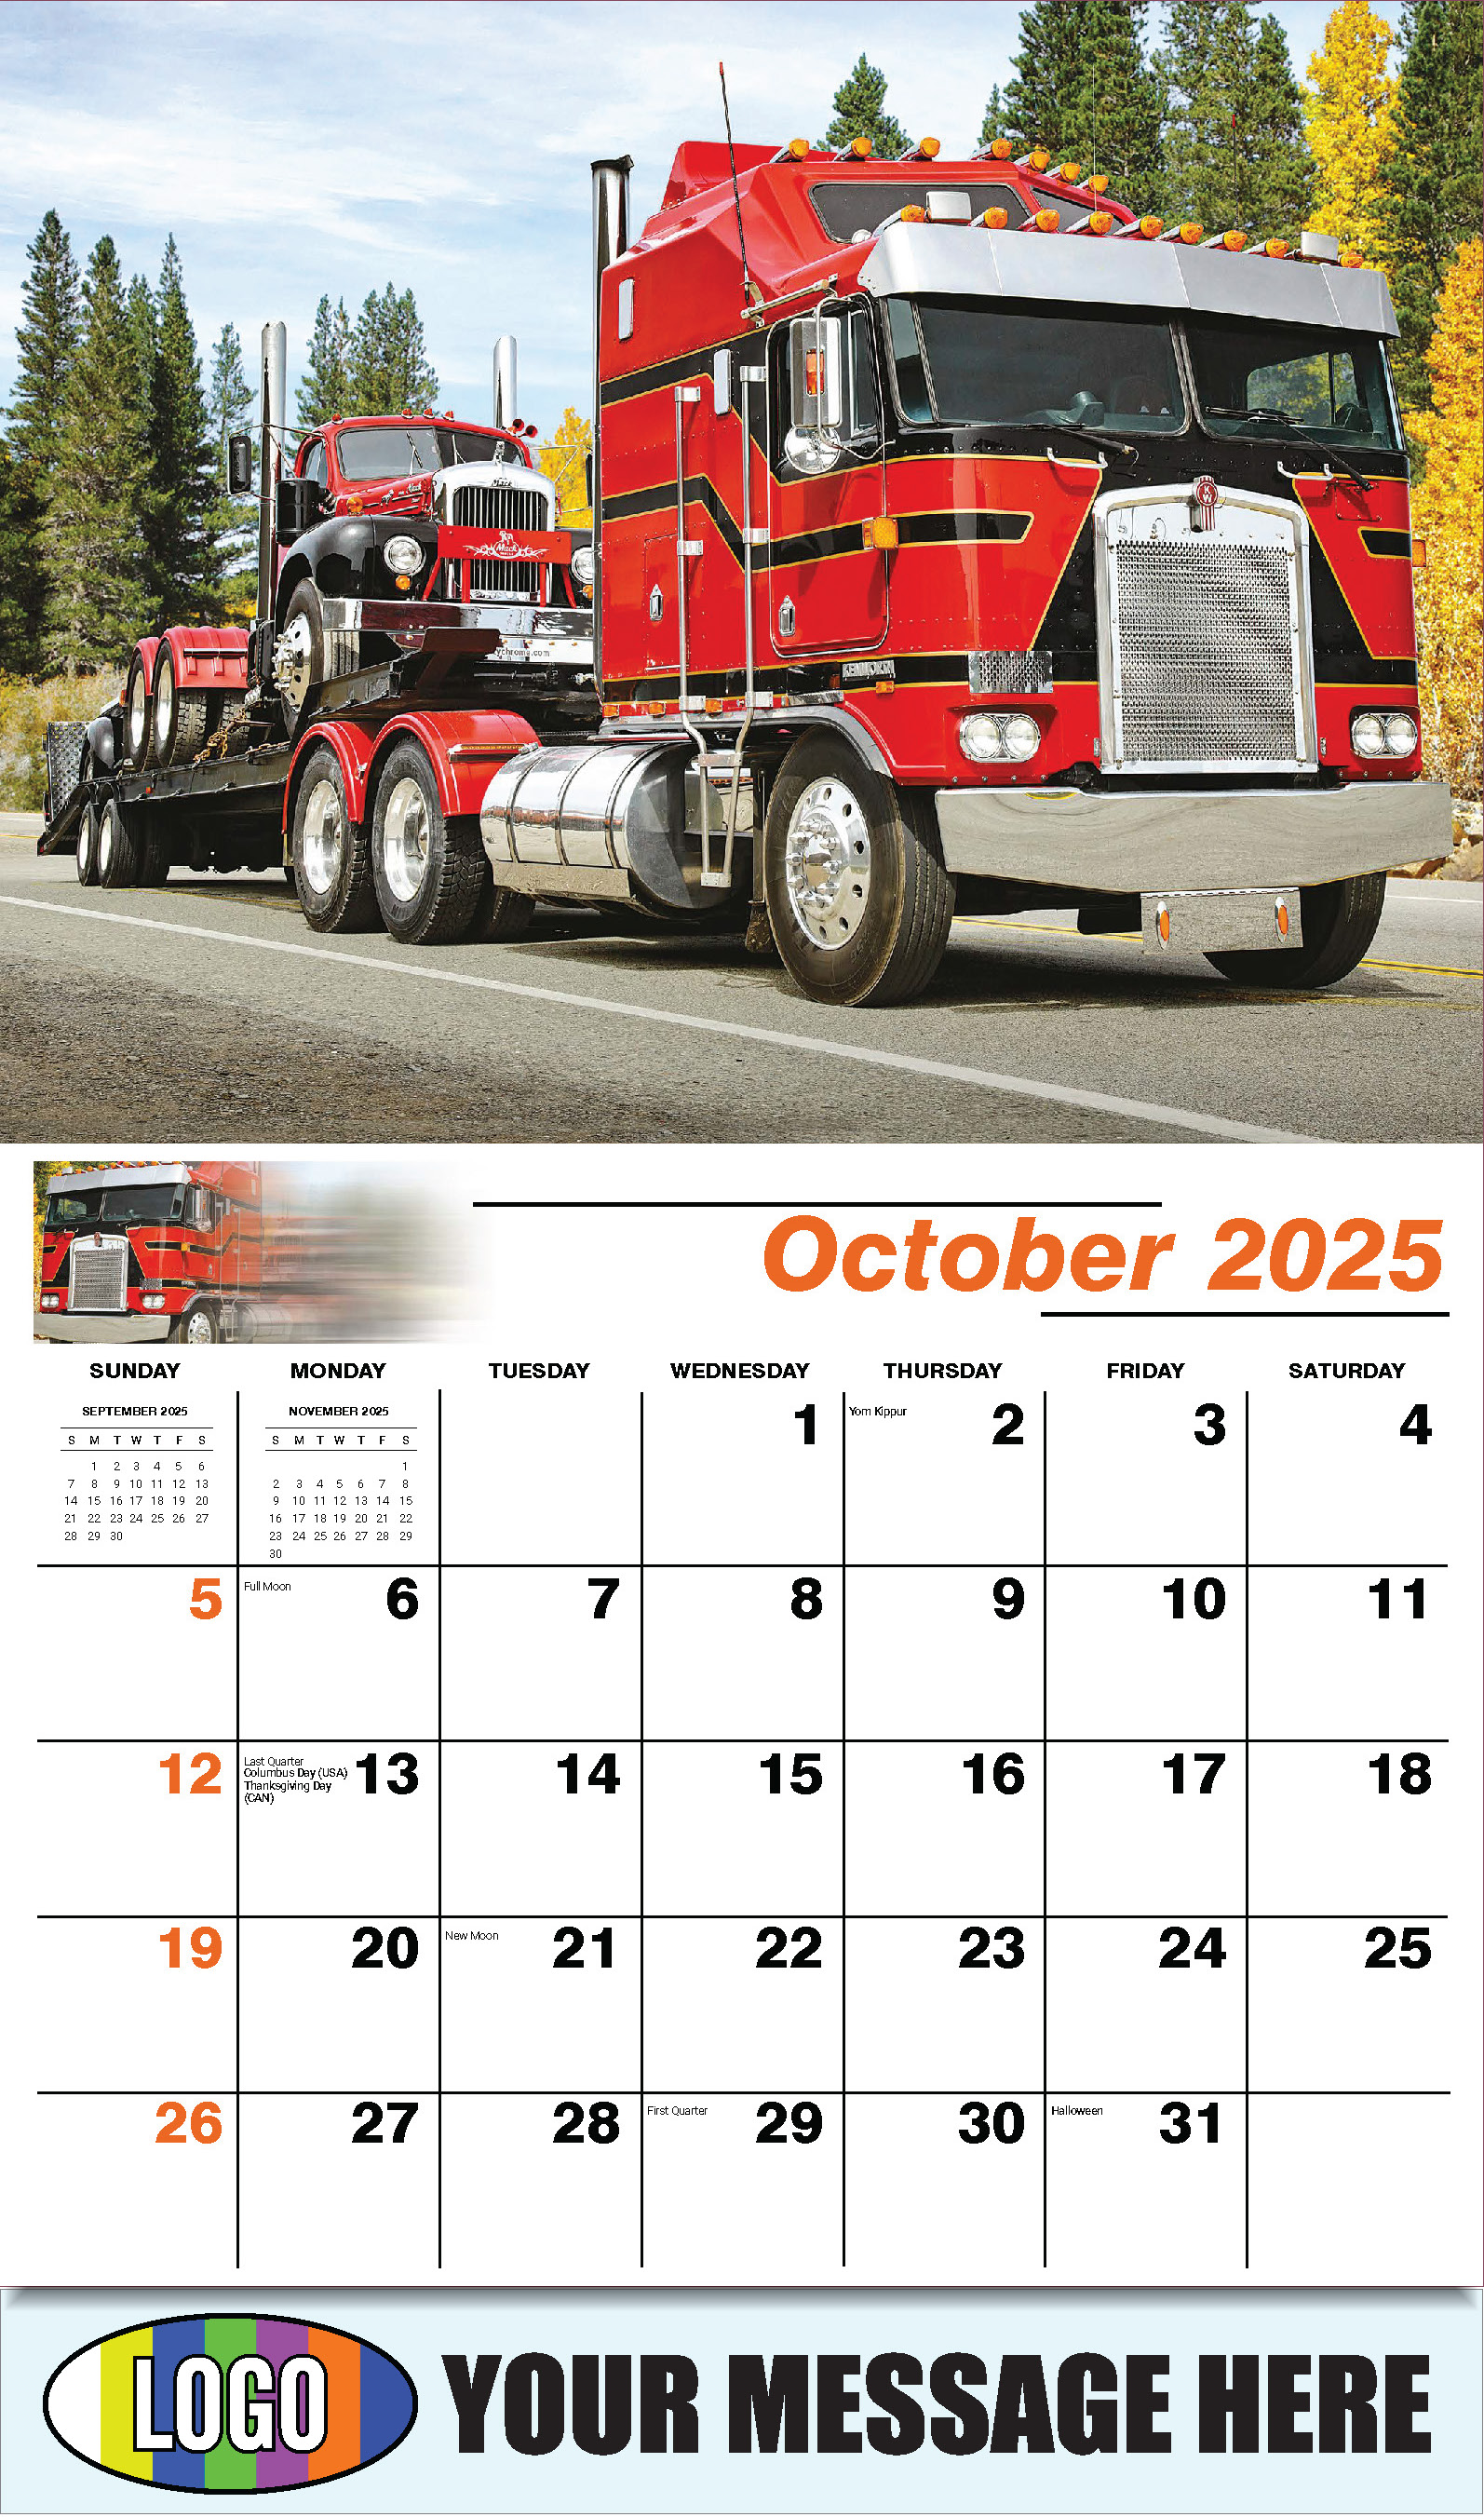 Kings of the Road 2025 Automotive Business Promotional Calendar - October